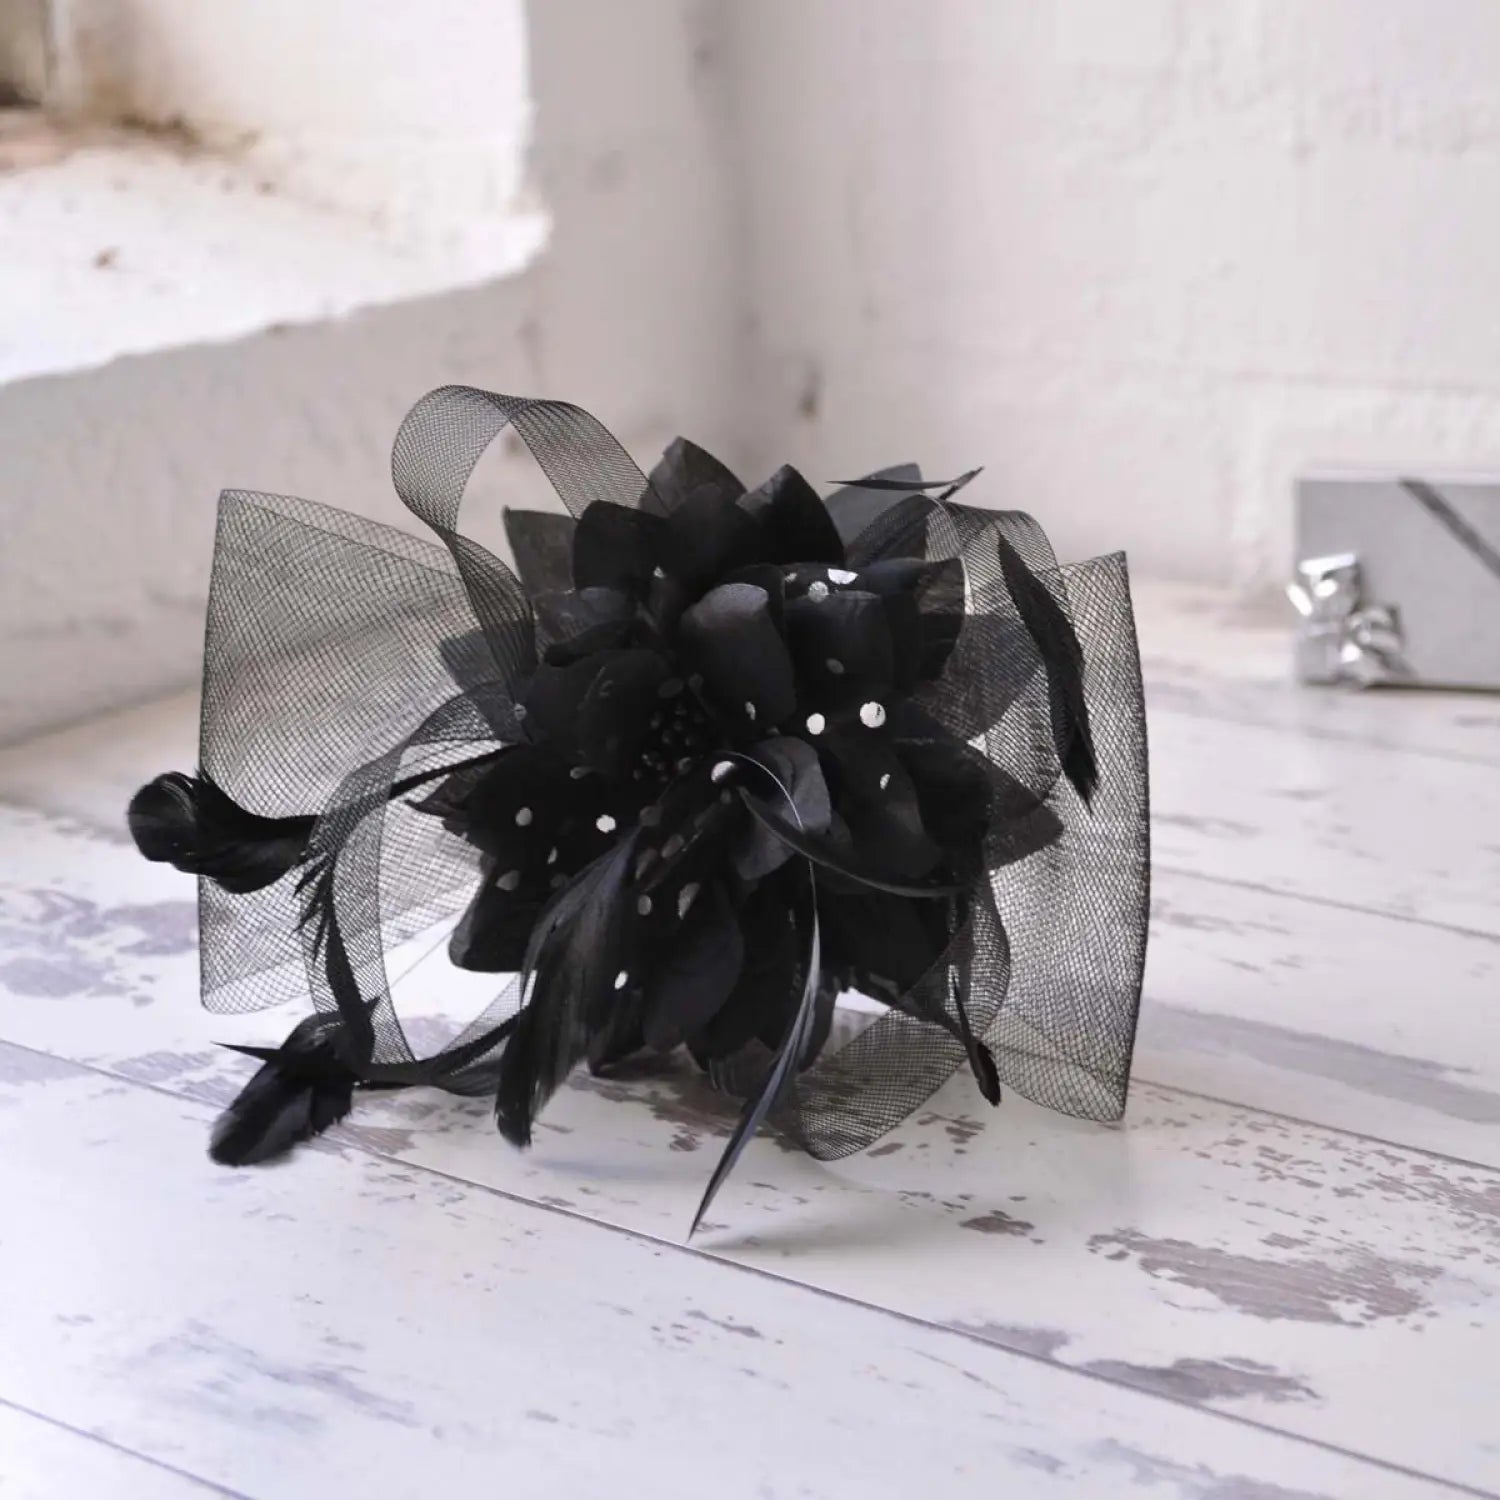 Black mesh flower and feather fascinator accessory comb on white table